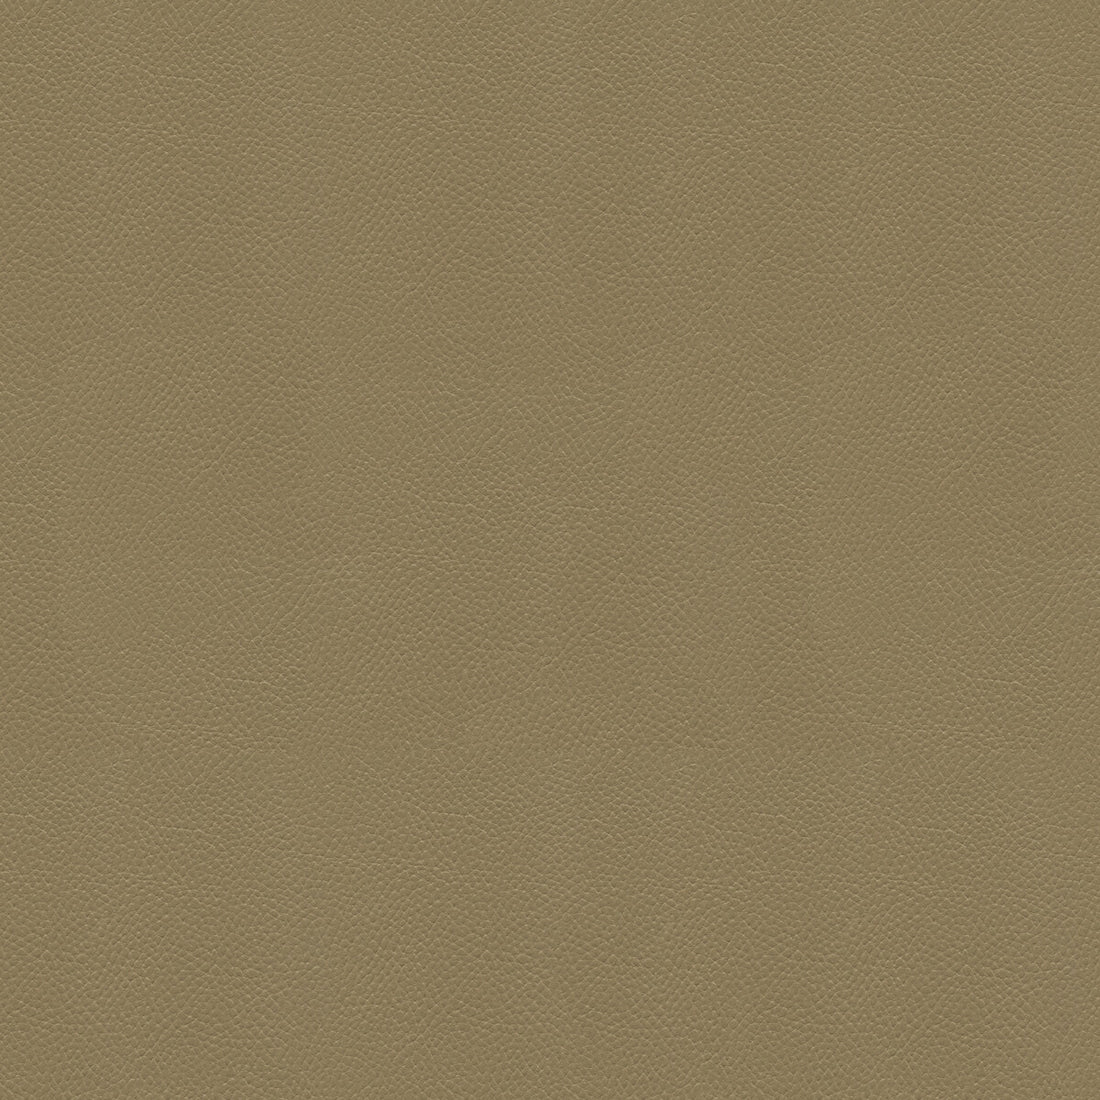 Side Kick fabric in taupe color - pattern SIDE KICK.106.0 - by Kravet Couture